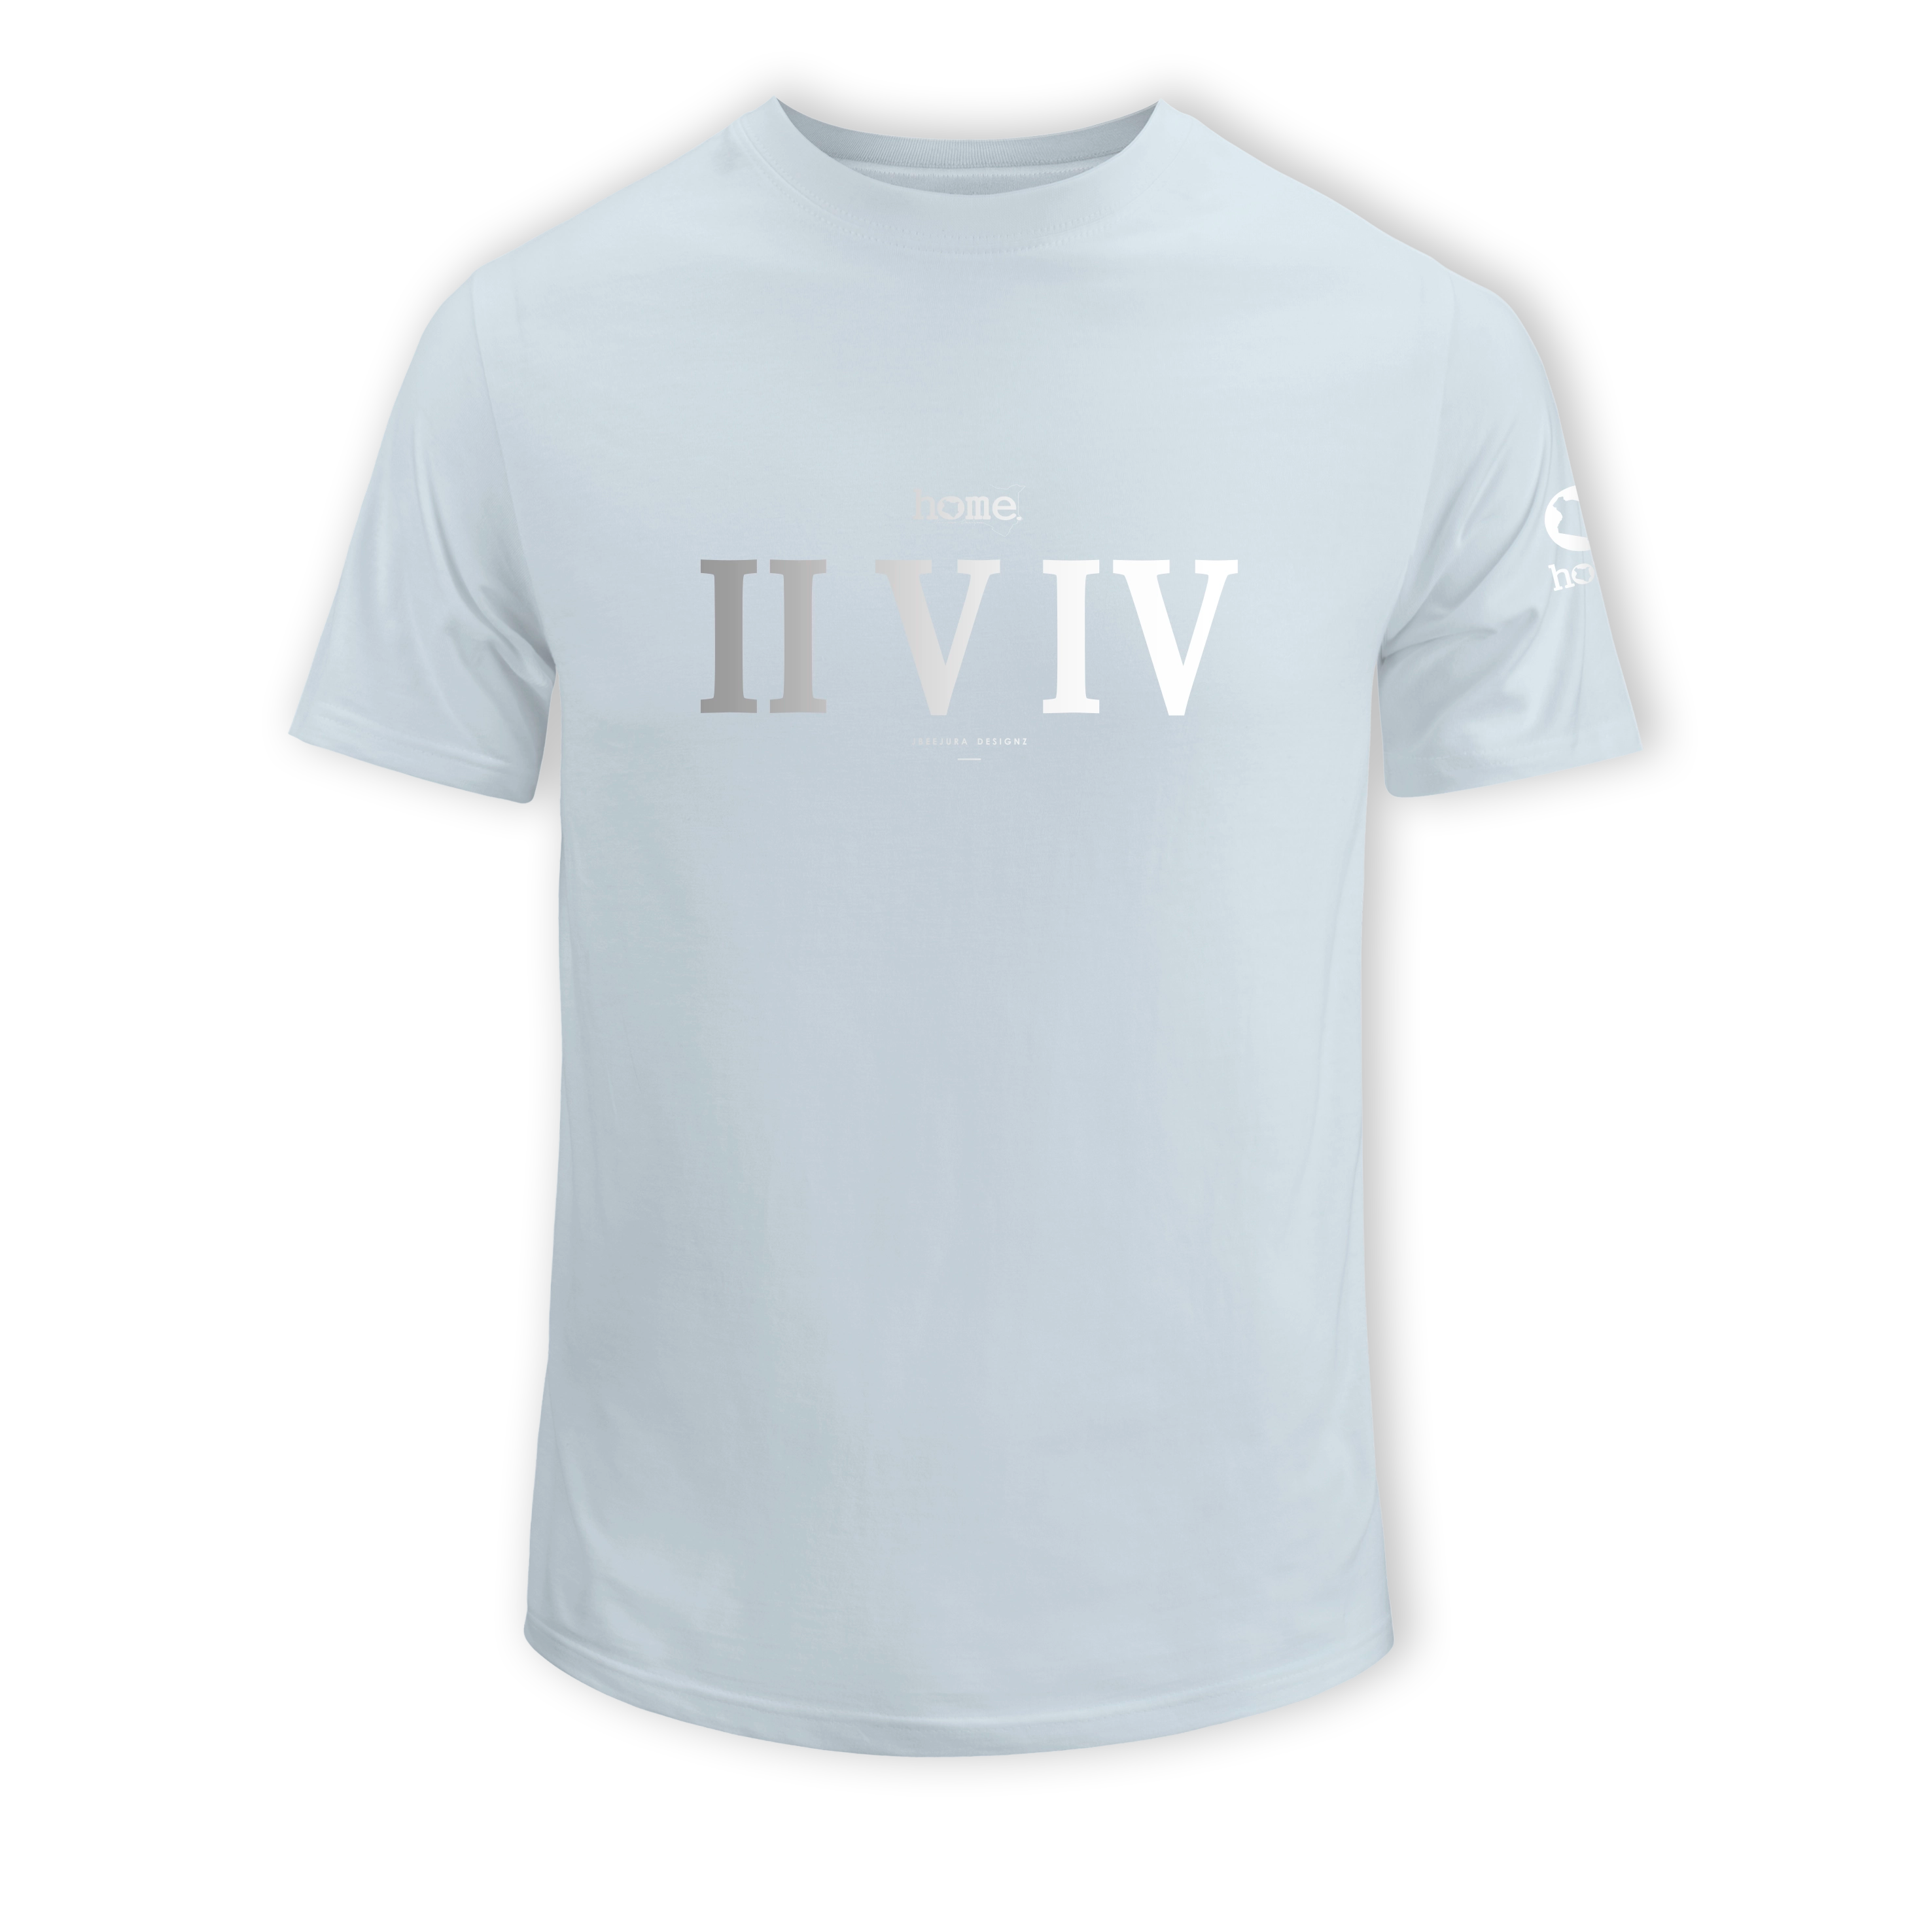 home_254 SHORT-SLEEVED SKY-BLUE T-SHIRT WITH A SILVER ROMAN NUMERALS PRINT – COTTON PLUS FABRIC